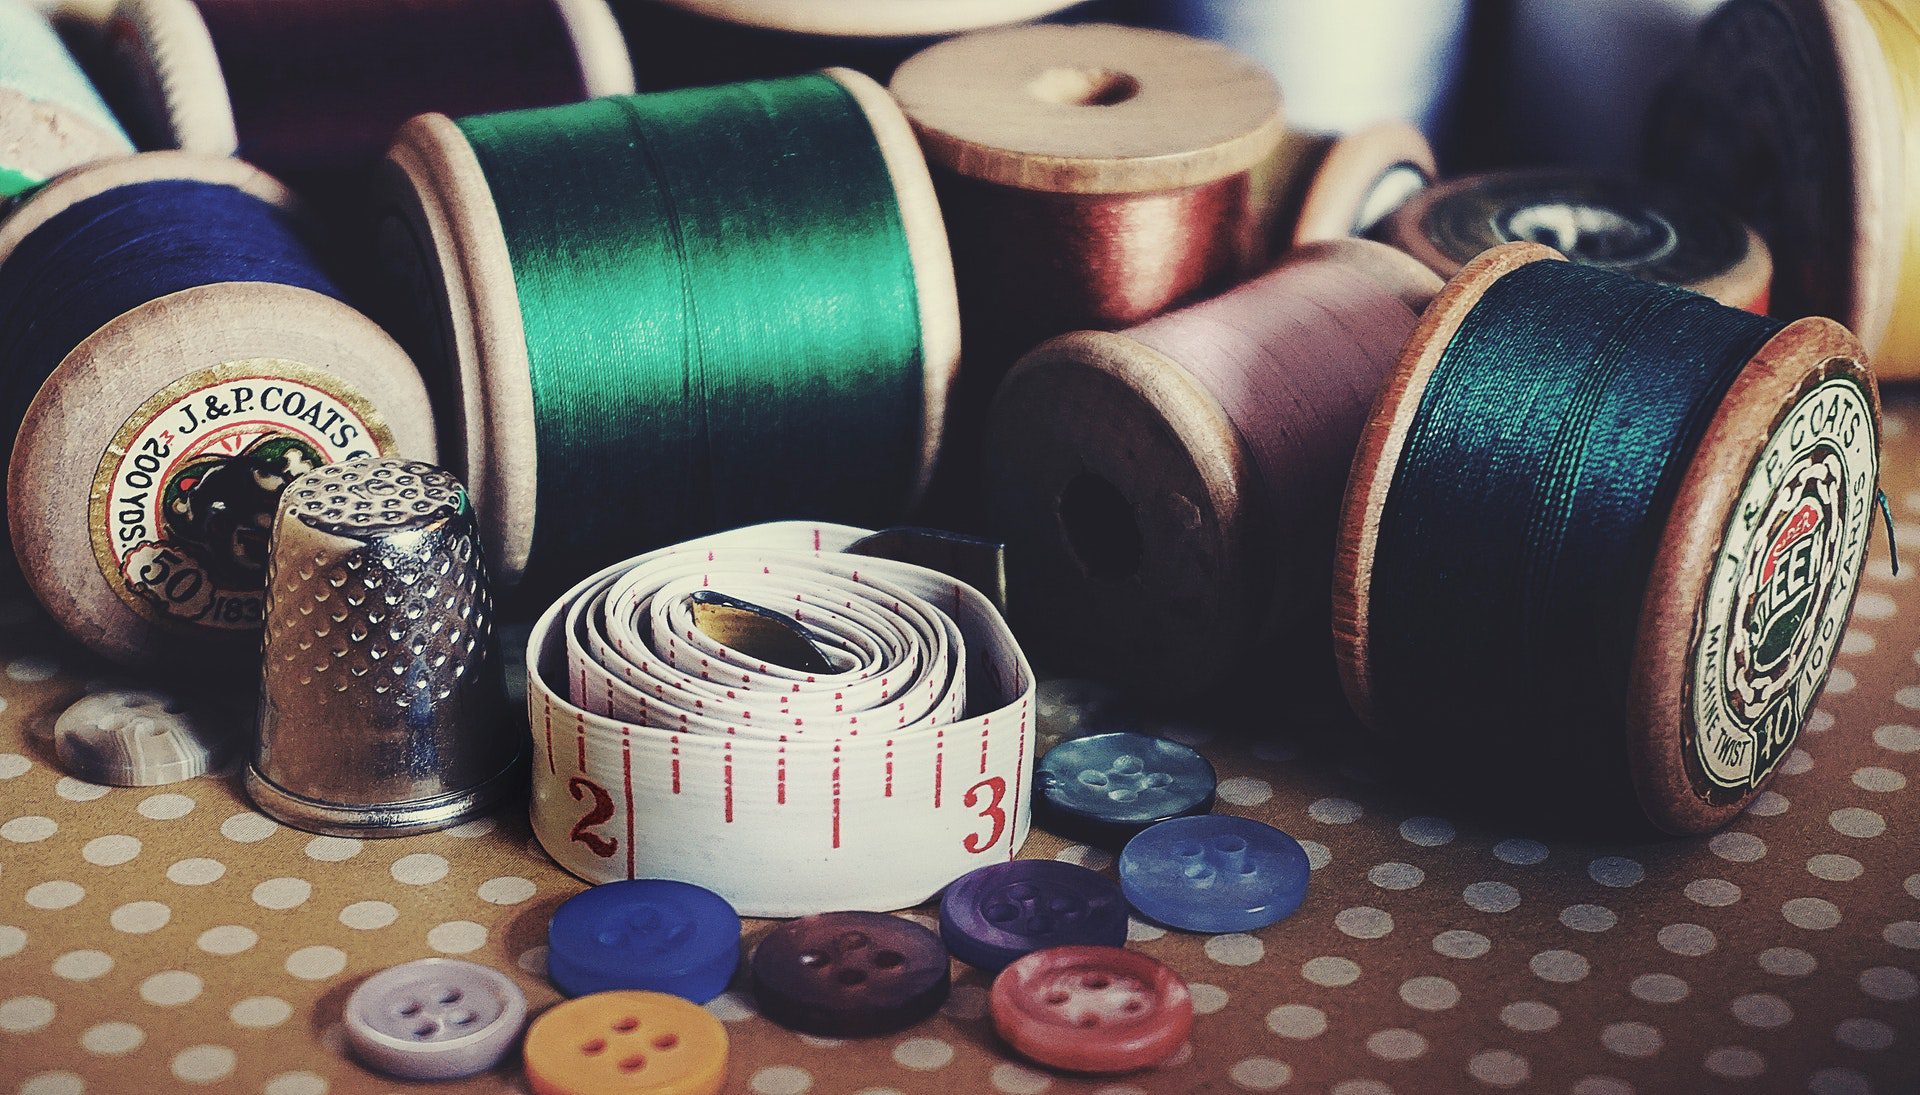 Buttons and thread